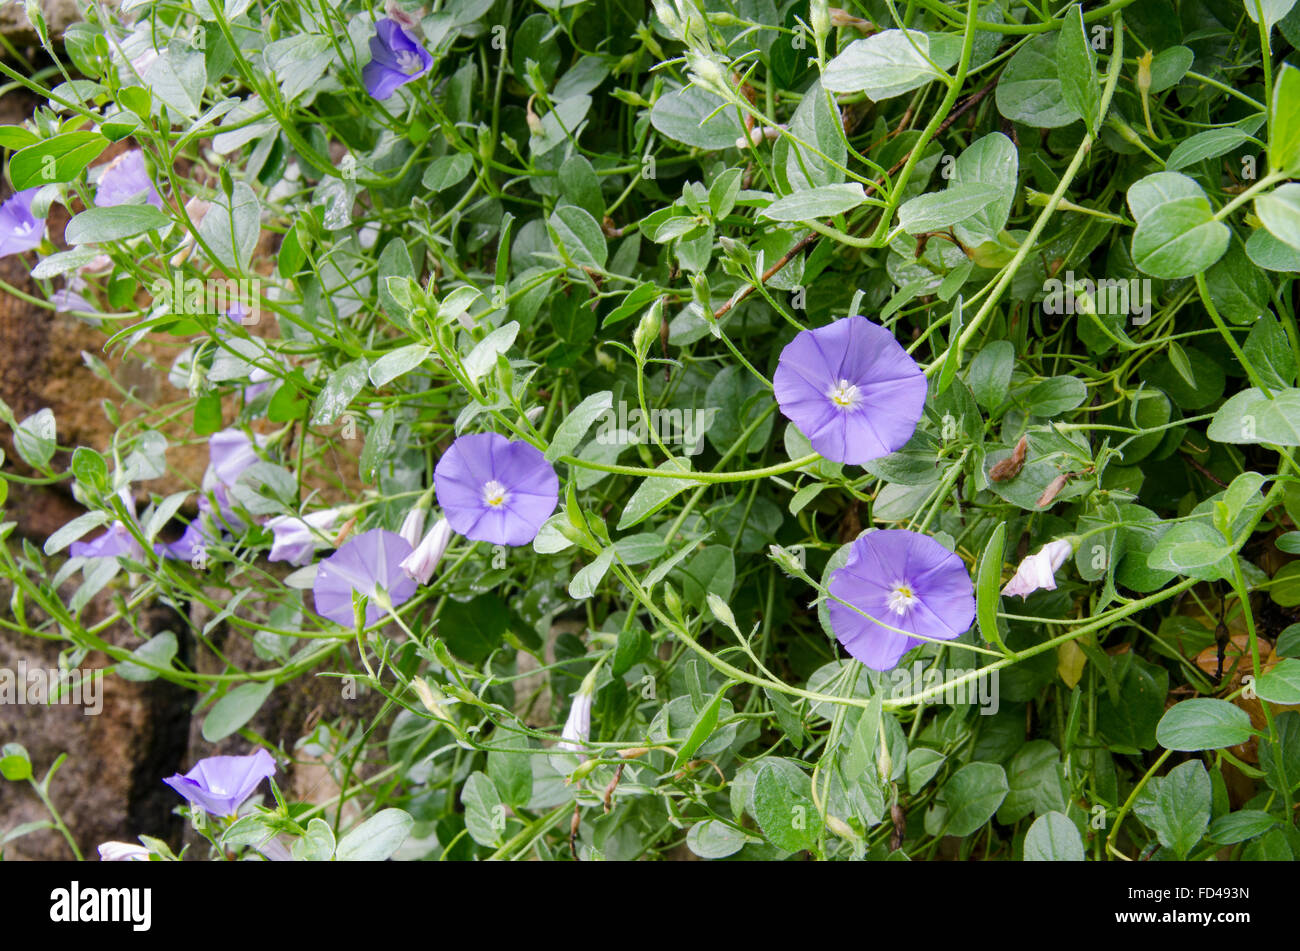 A flowering Convolvulus creeper plant hangs over a stone wall in a Sydney garden Stock Photo